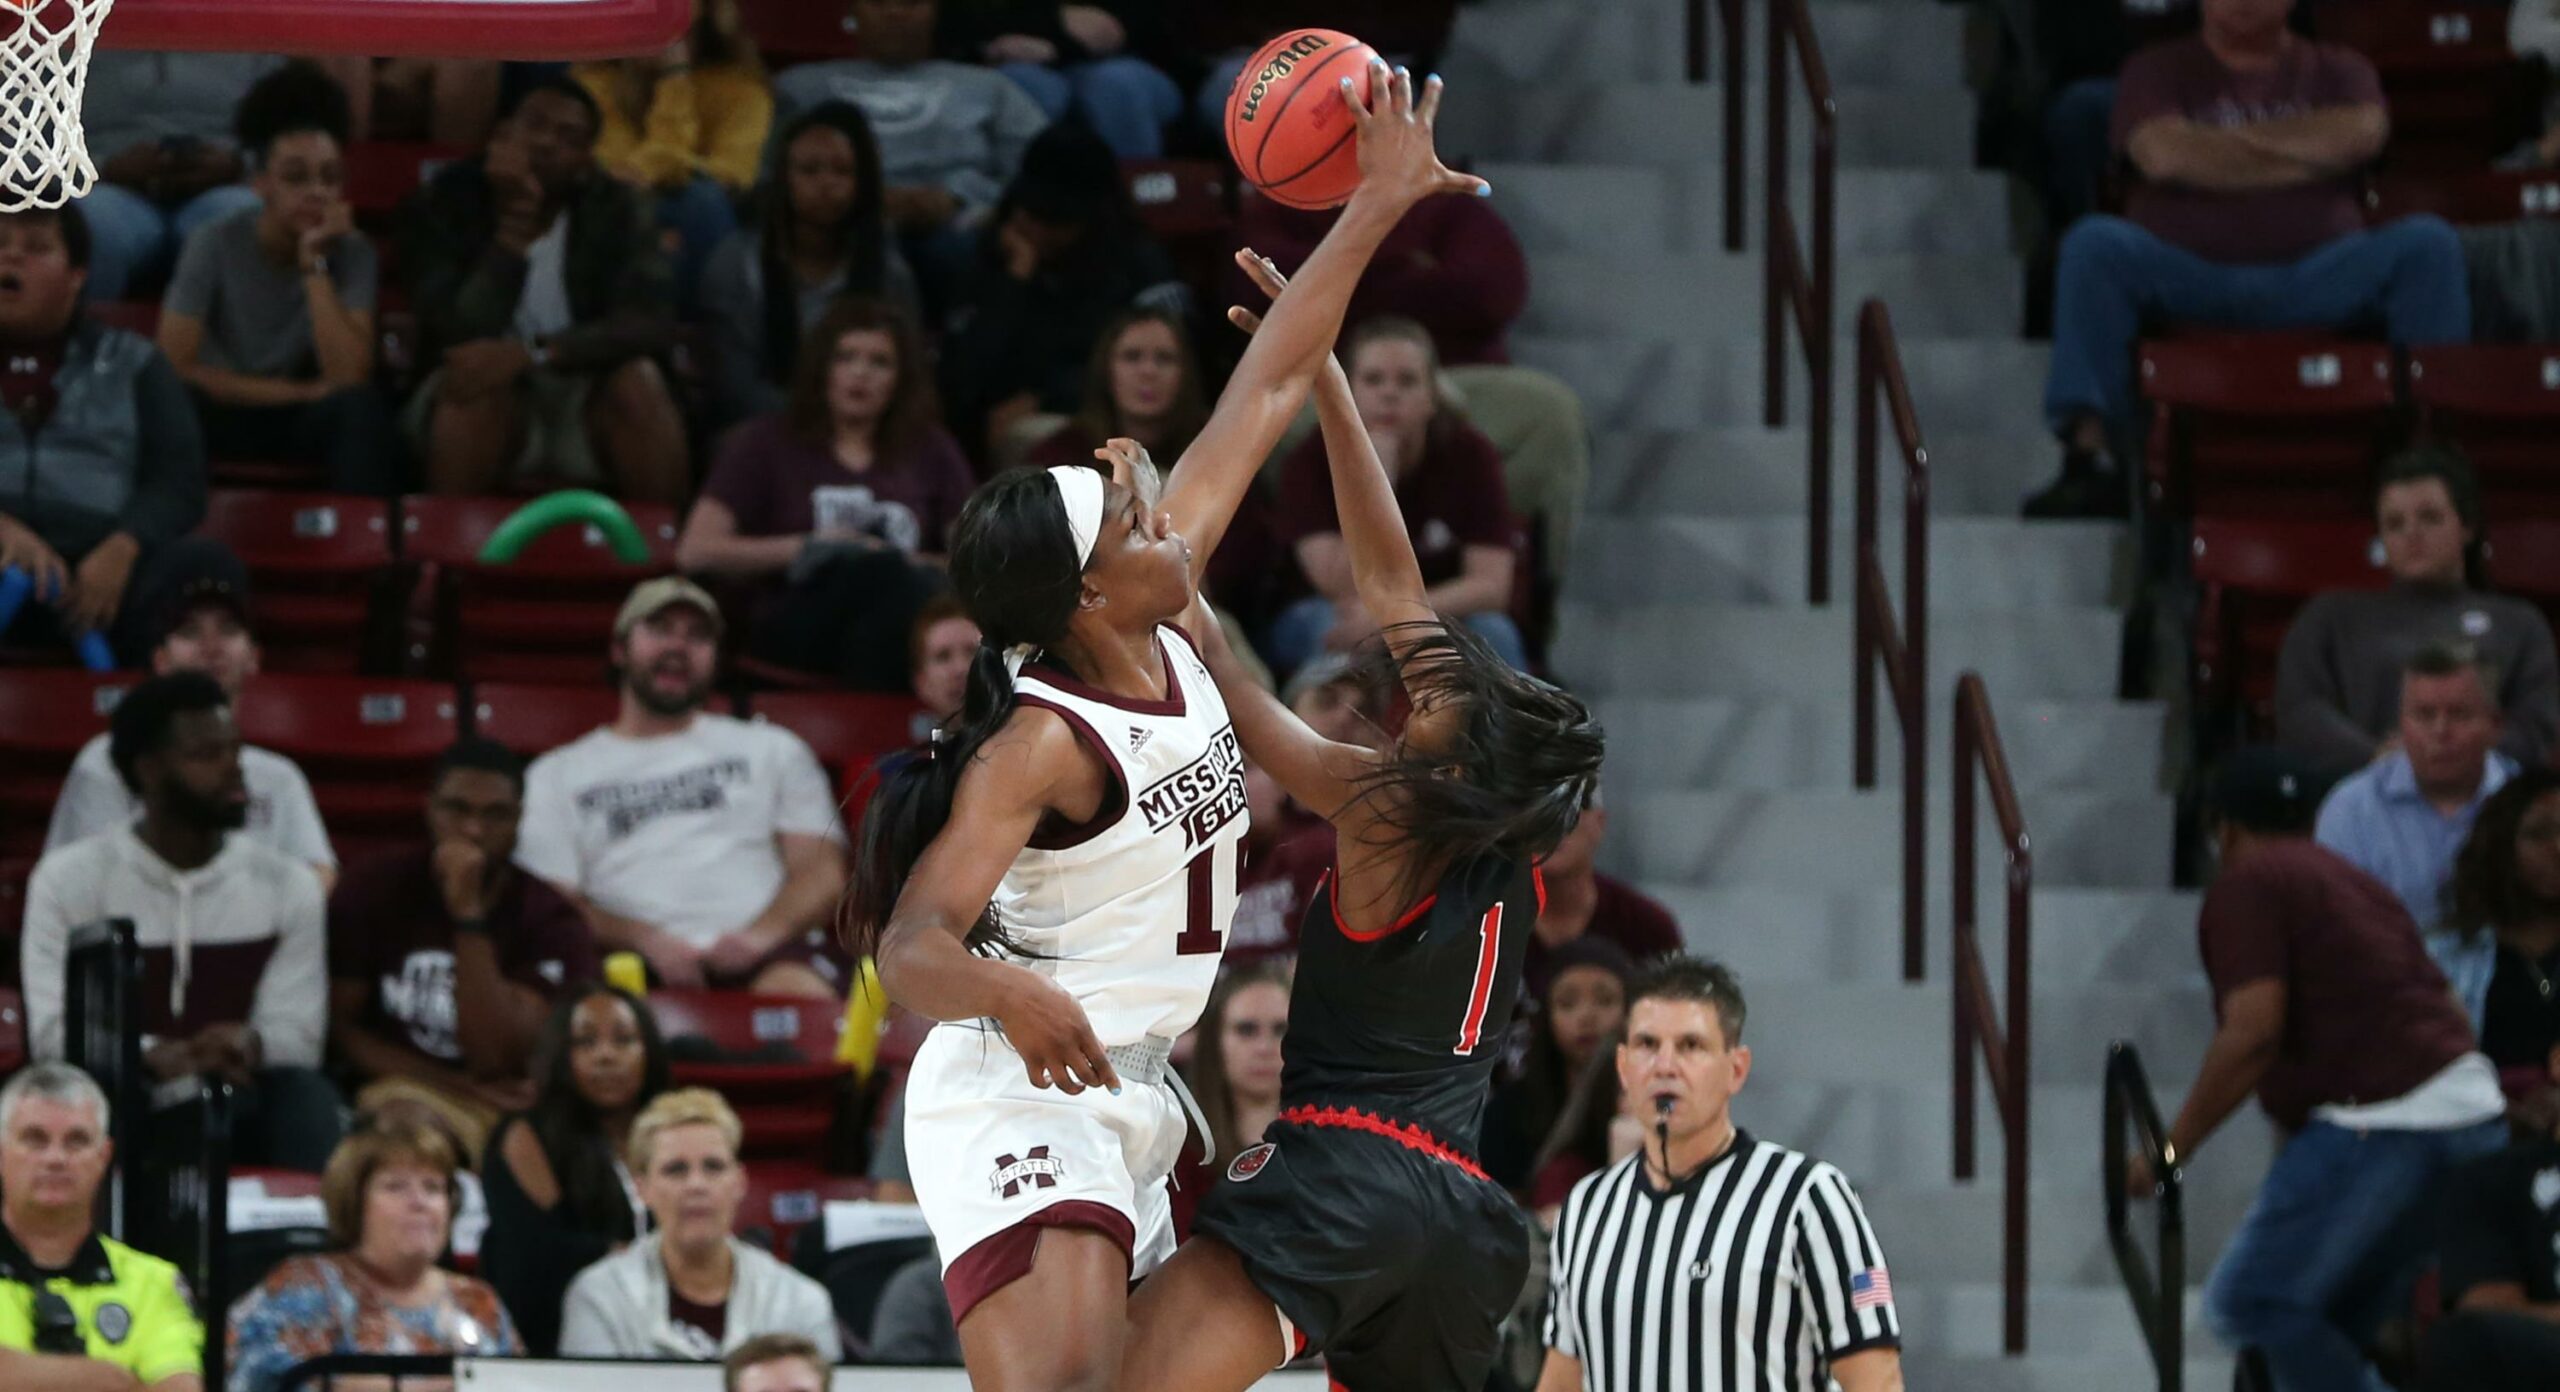 Led by Teaira McCowan, Mississippi State opens season with a victory over Southeast Missouri, 88-53